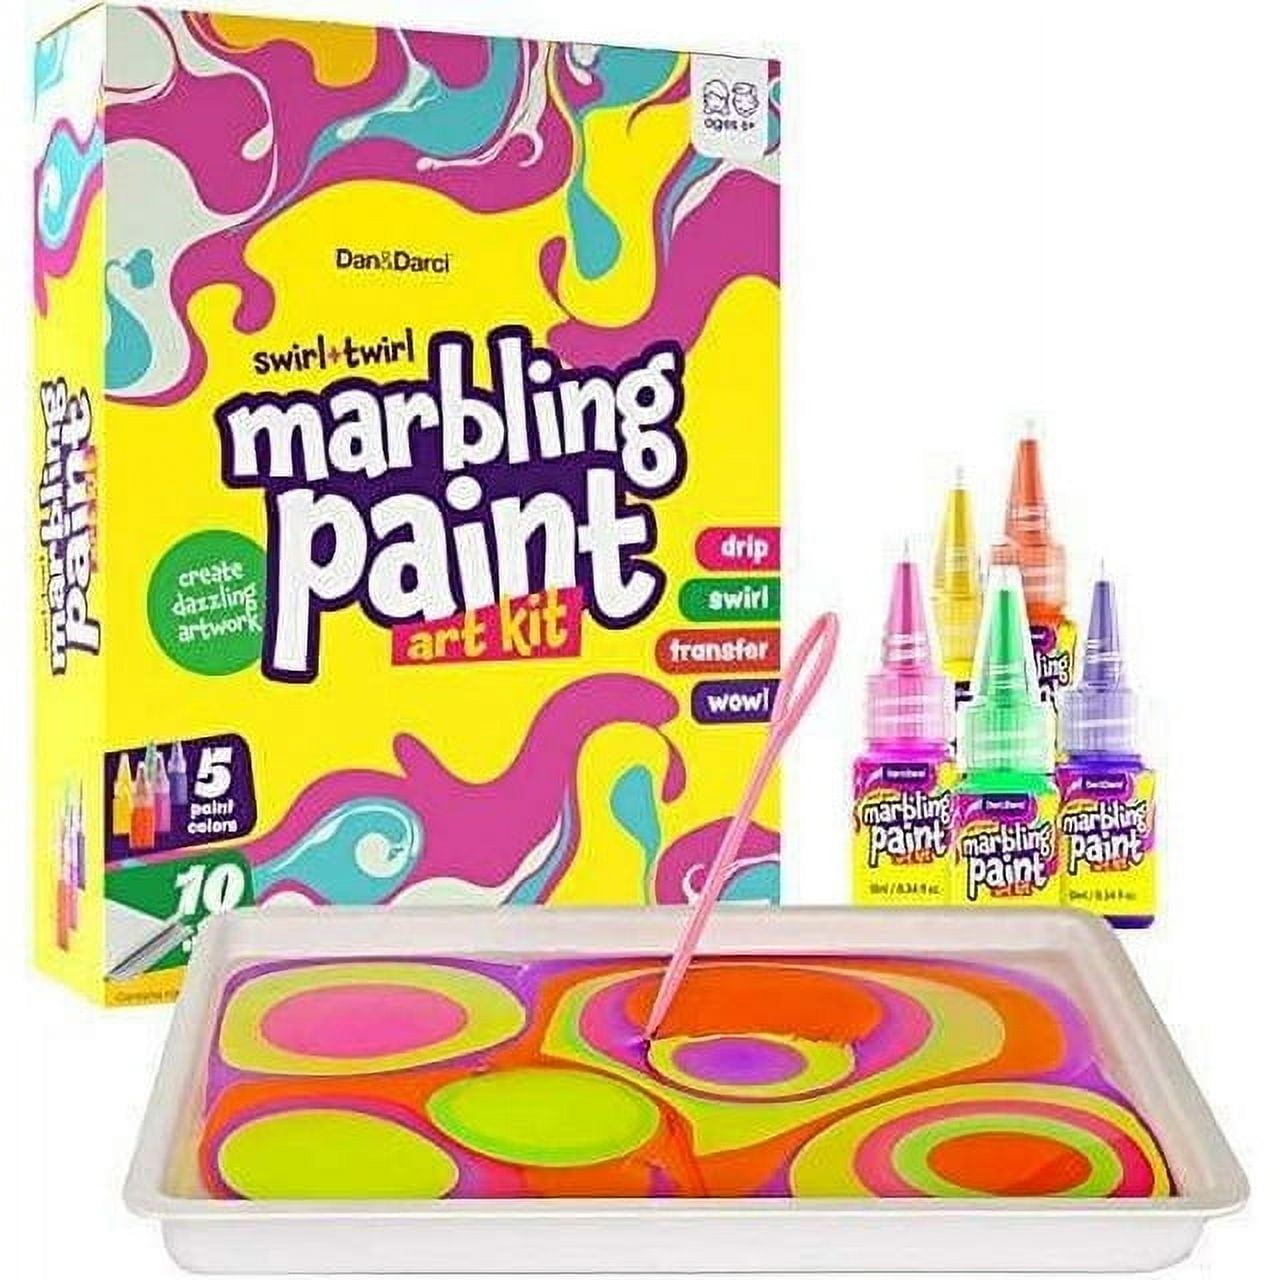  Hiwawind Water Marbling Paint Art Kit for Kids - Art Supplies  for Kids 9-12, Arts & Crafts for Girls Kids 8-12, Ideal Gifts for 6 7 8 9  10 11 12 Year Old Girls (12 Colors) : Toys & Games